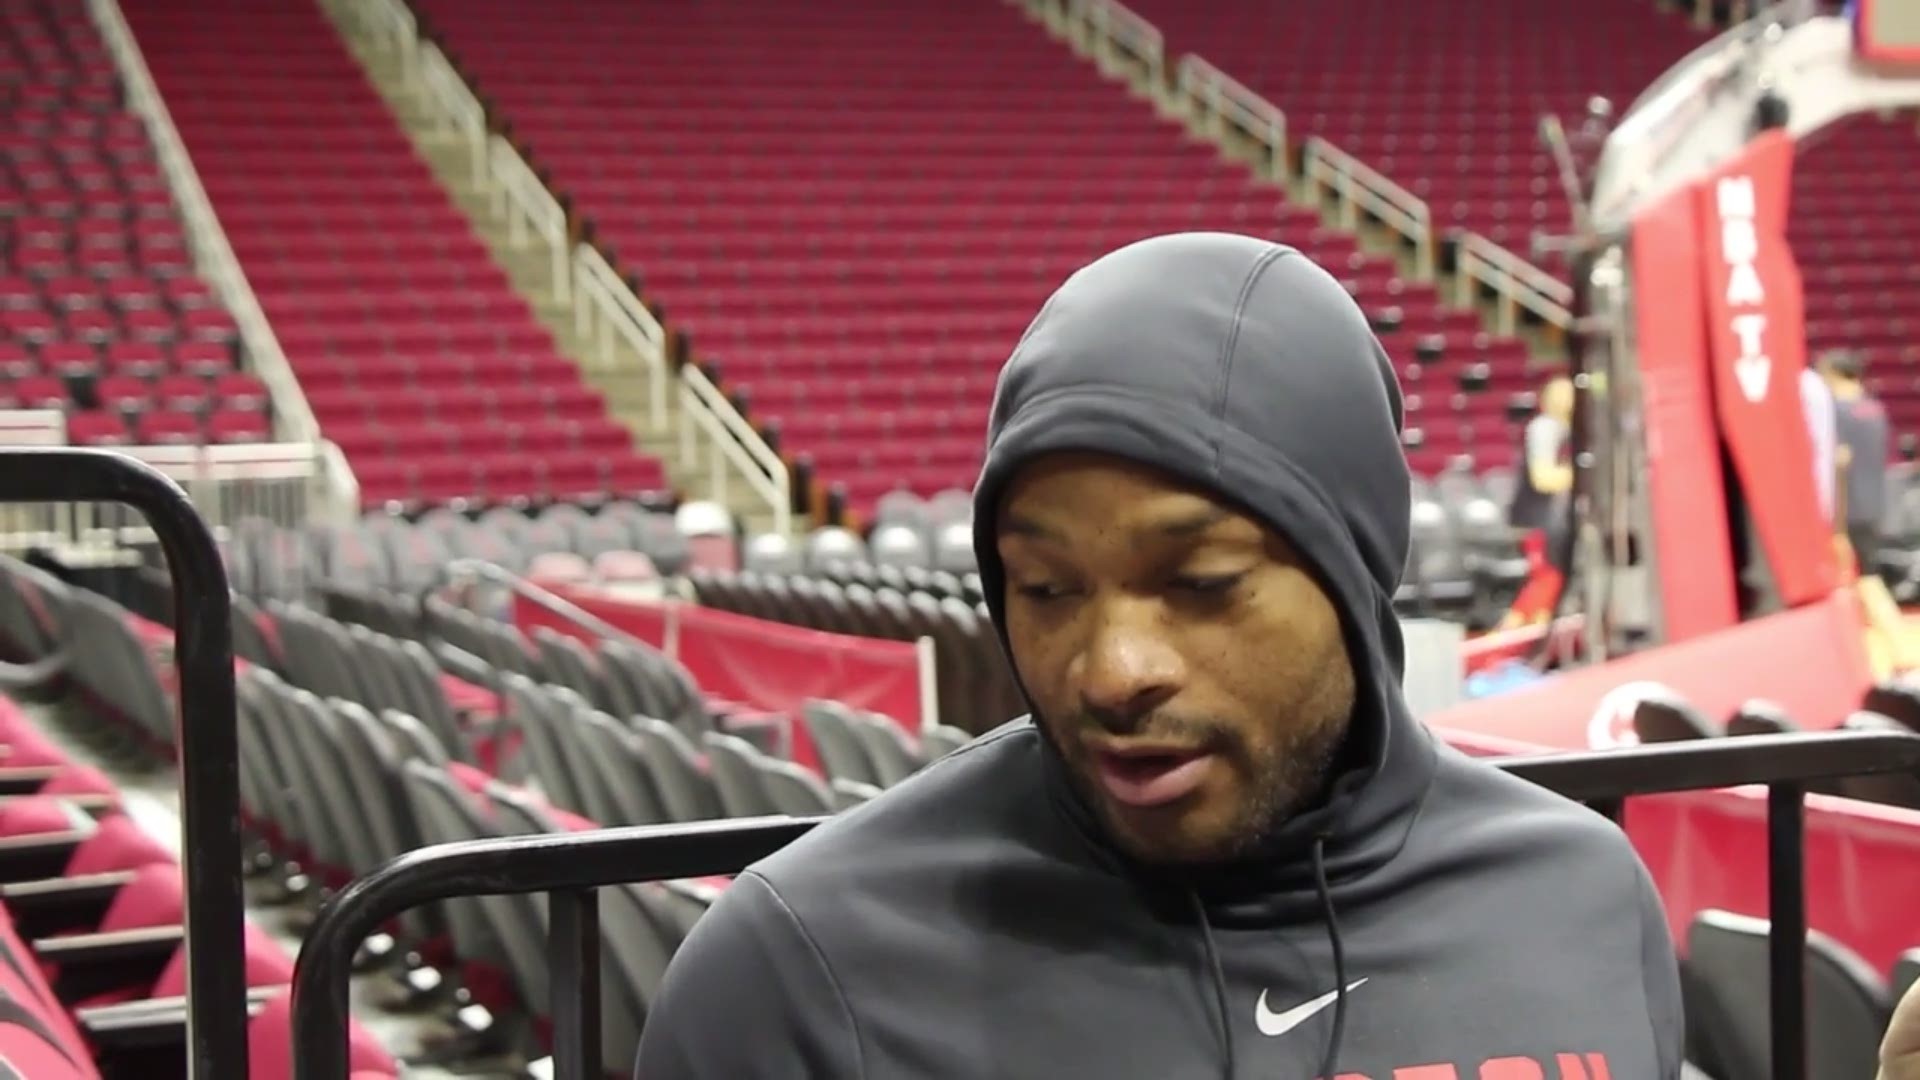 PJ Tucker meets with the media May 12, 2018, just two days before game 1 of the Houston Rockets' showdown in the Western Conference finals against the Golden State Warriors.